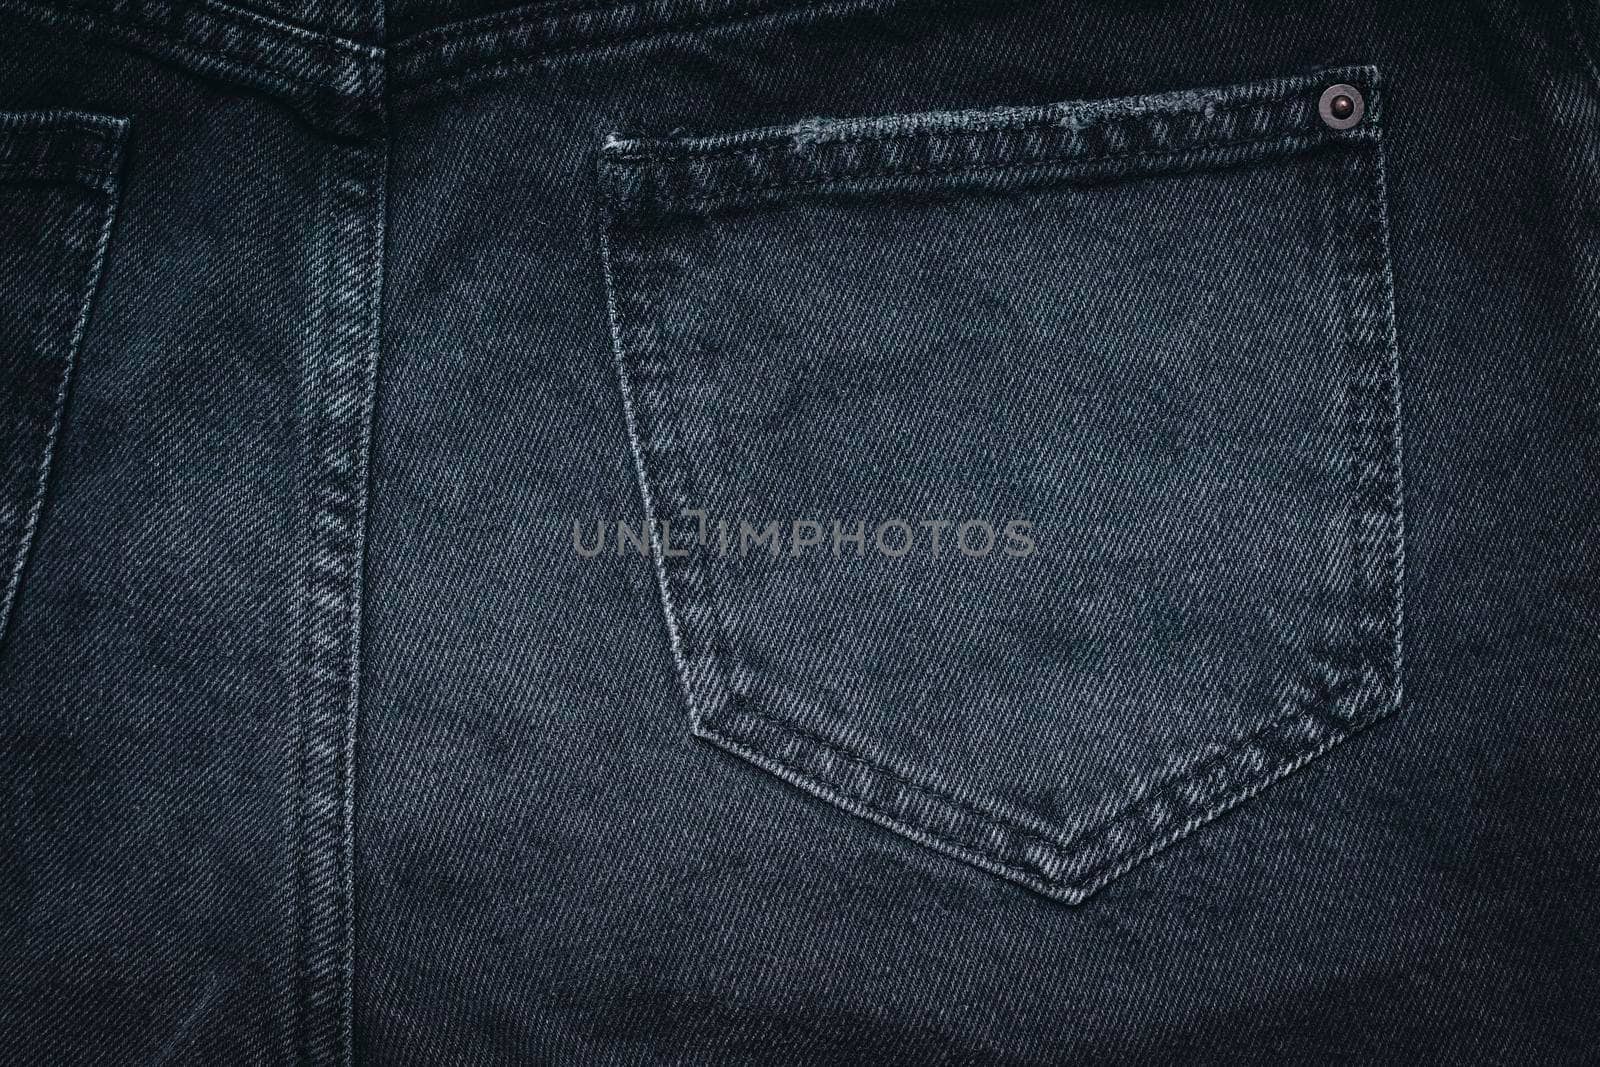 Jeans texture with pocket. Highly detailed closeup of black jeans. Cool background. by creativebird